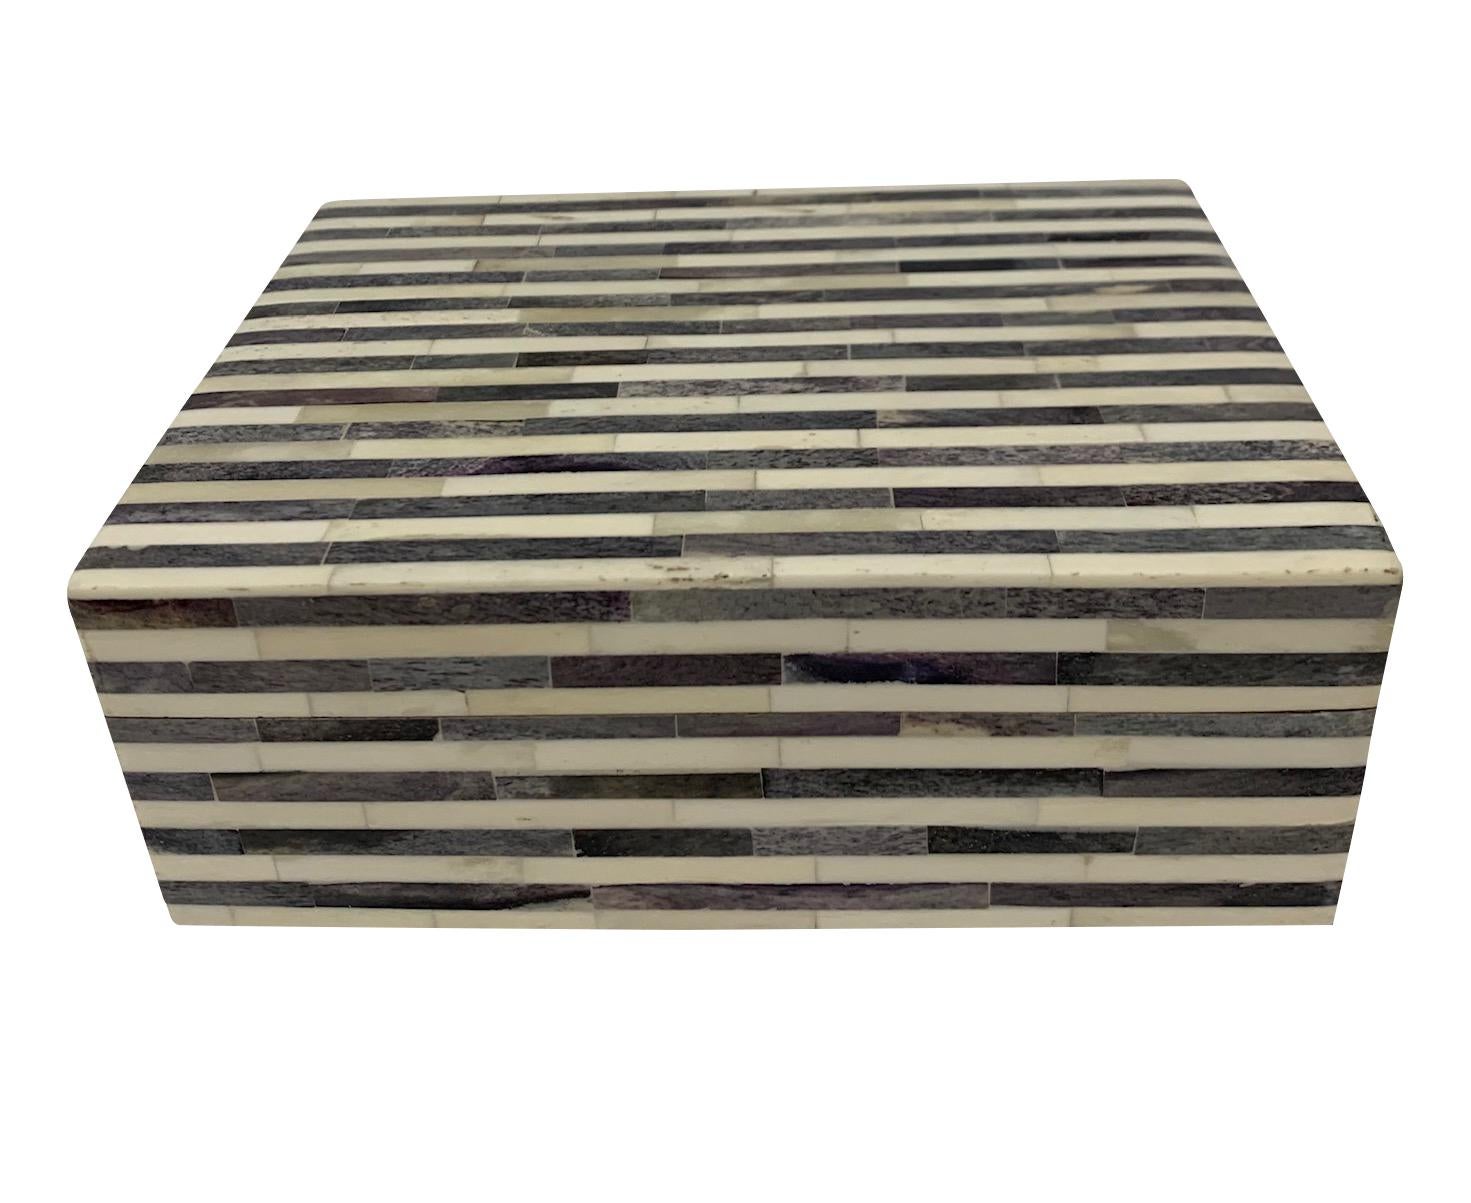 Contemporary Indian lidded bone decorative box. 
Horizontal charcoal grey and cream stripes.
Part of a large collection of bone boxes.